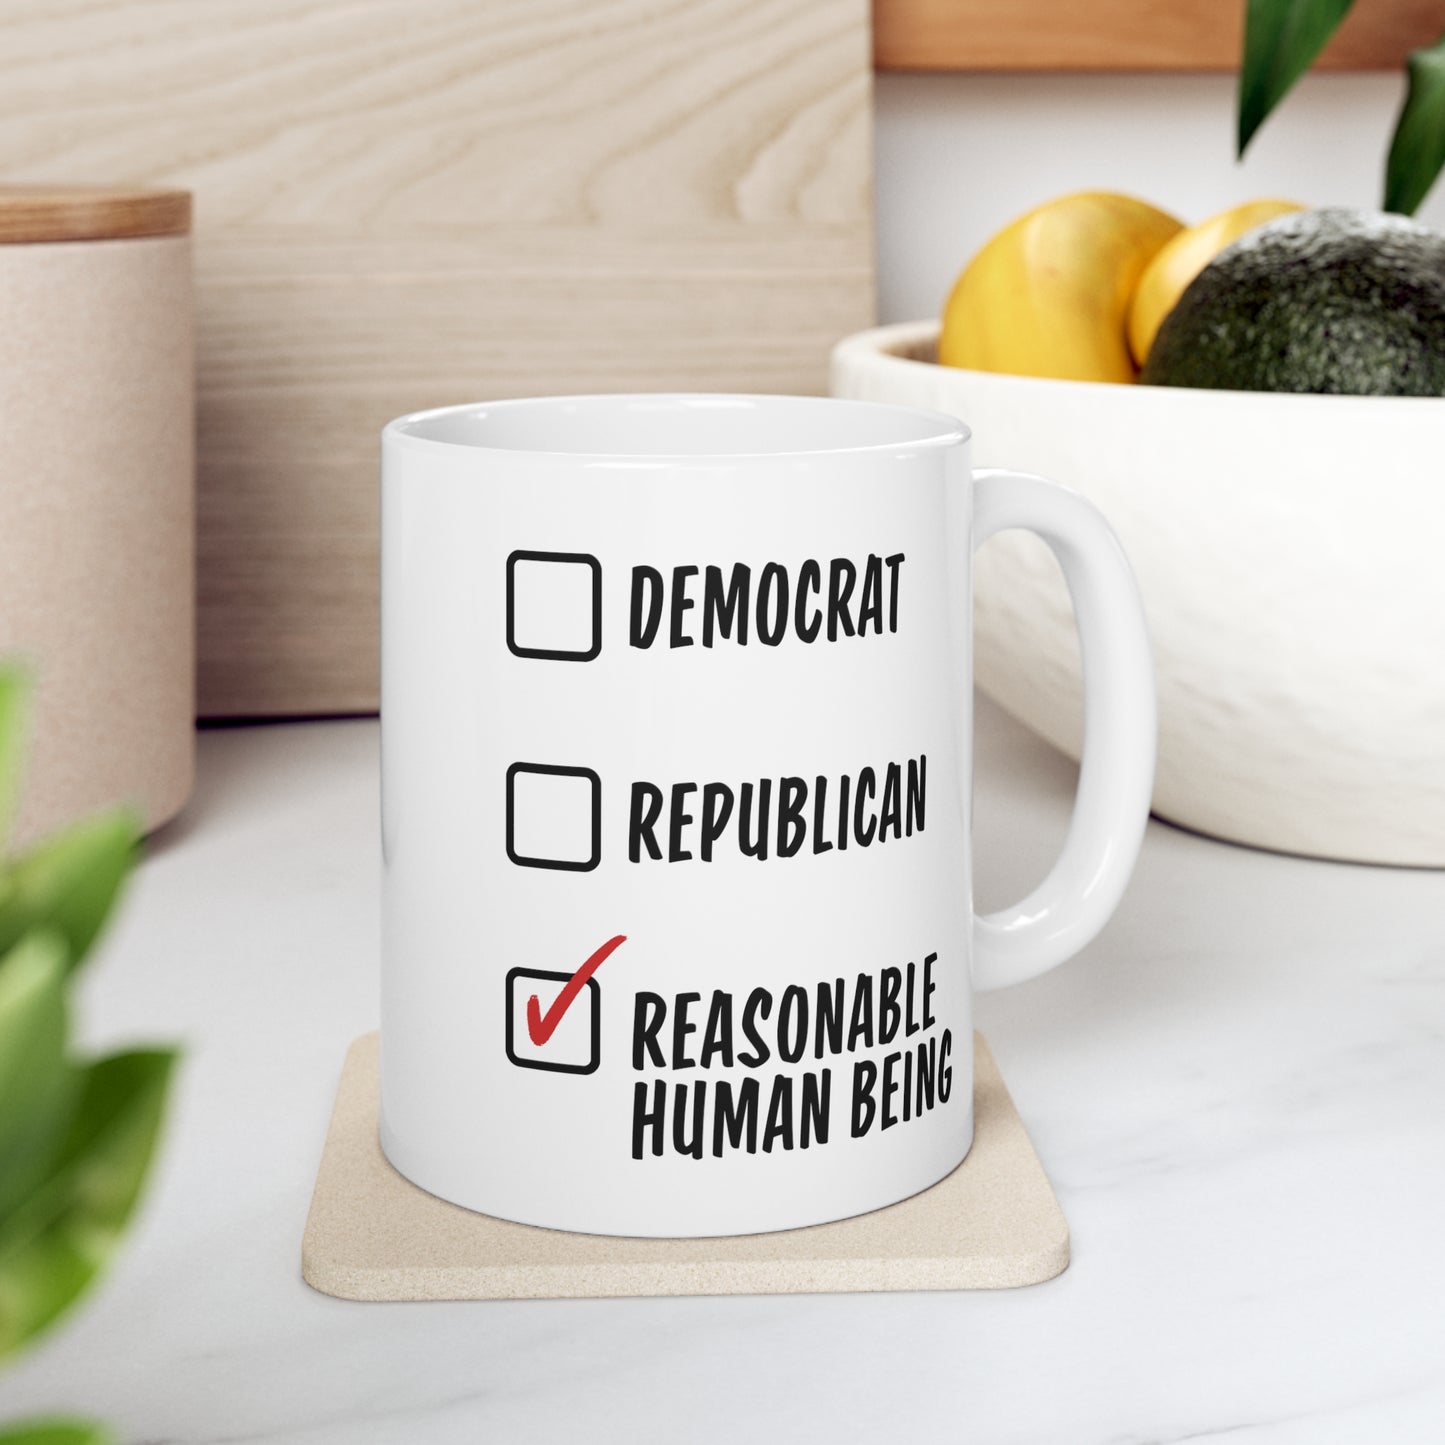 Funny Political Mug, Reasonable Human Being, Democrat Republican Checklist, Coffee Cup Humor, Gift for Friends, Bipartisan Laugh, Novelty - News For Reasonable People